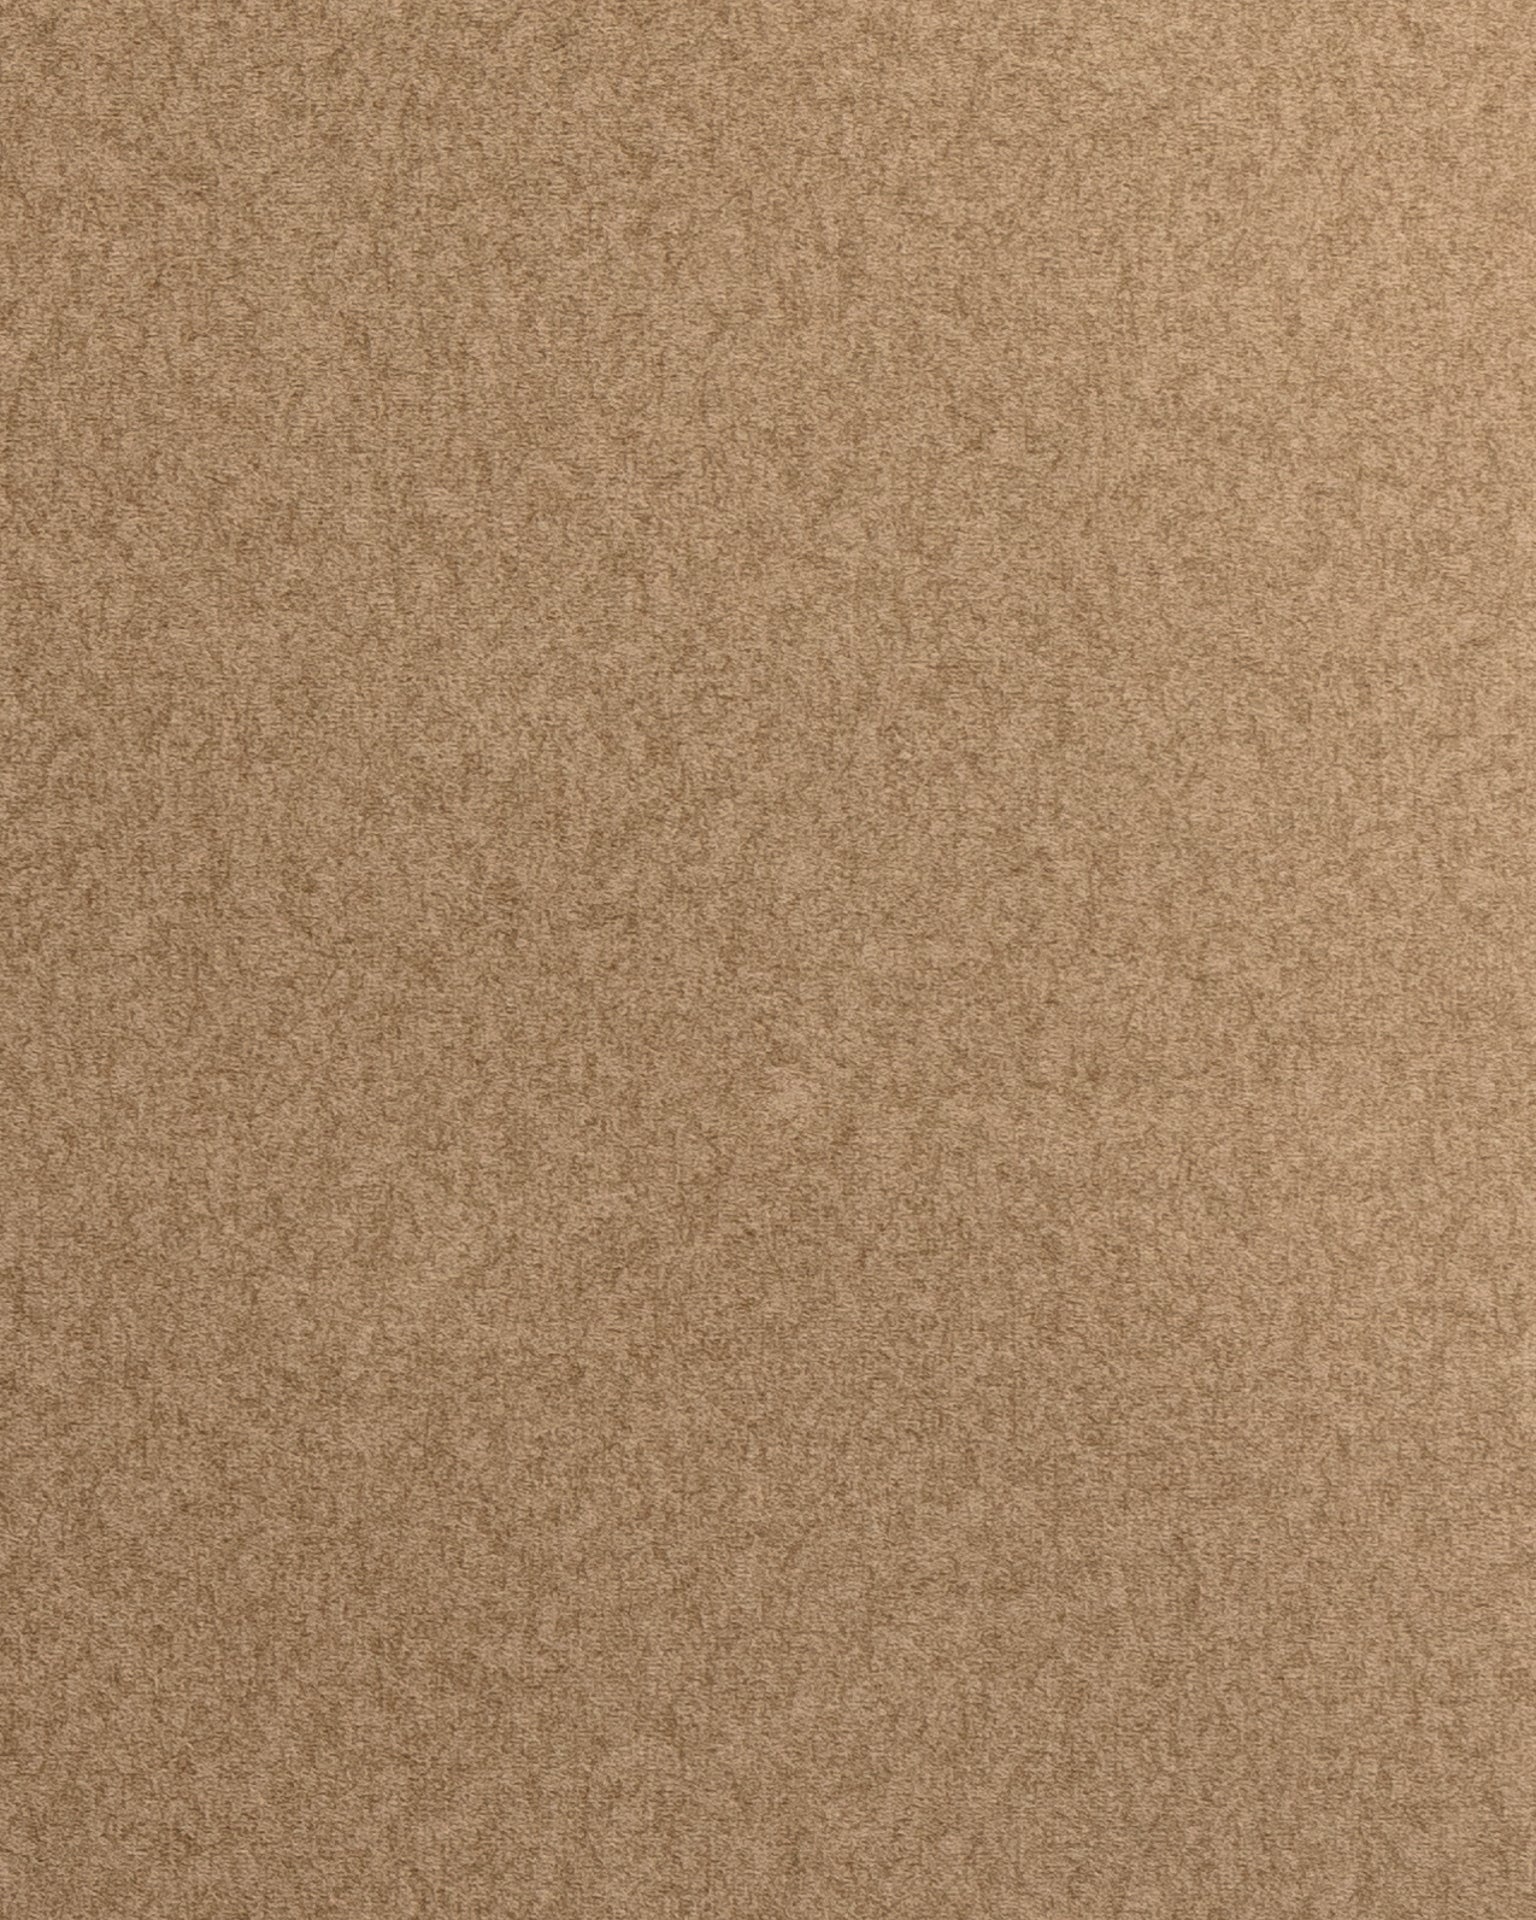 Close-up of a smooth, uniformly textured Soft Camel 24x24&quot; cork board surface, useful for background or design purposes in a Gabby Scottsdale Arizona bungalow.